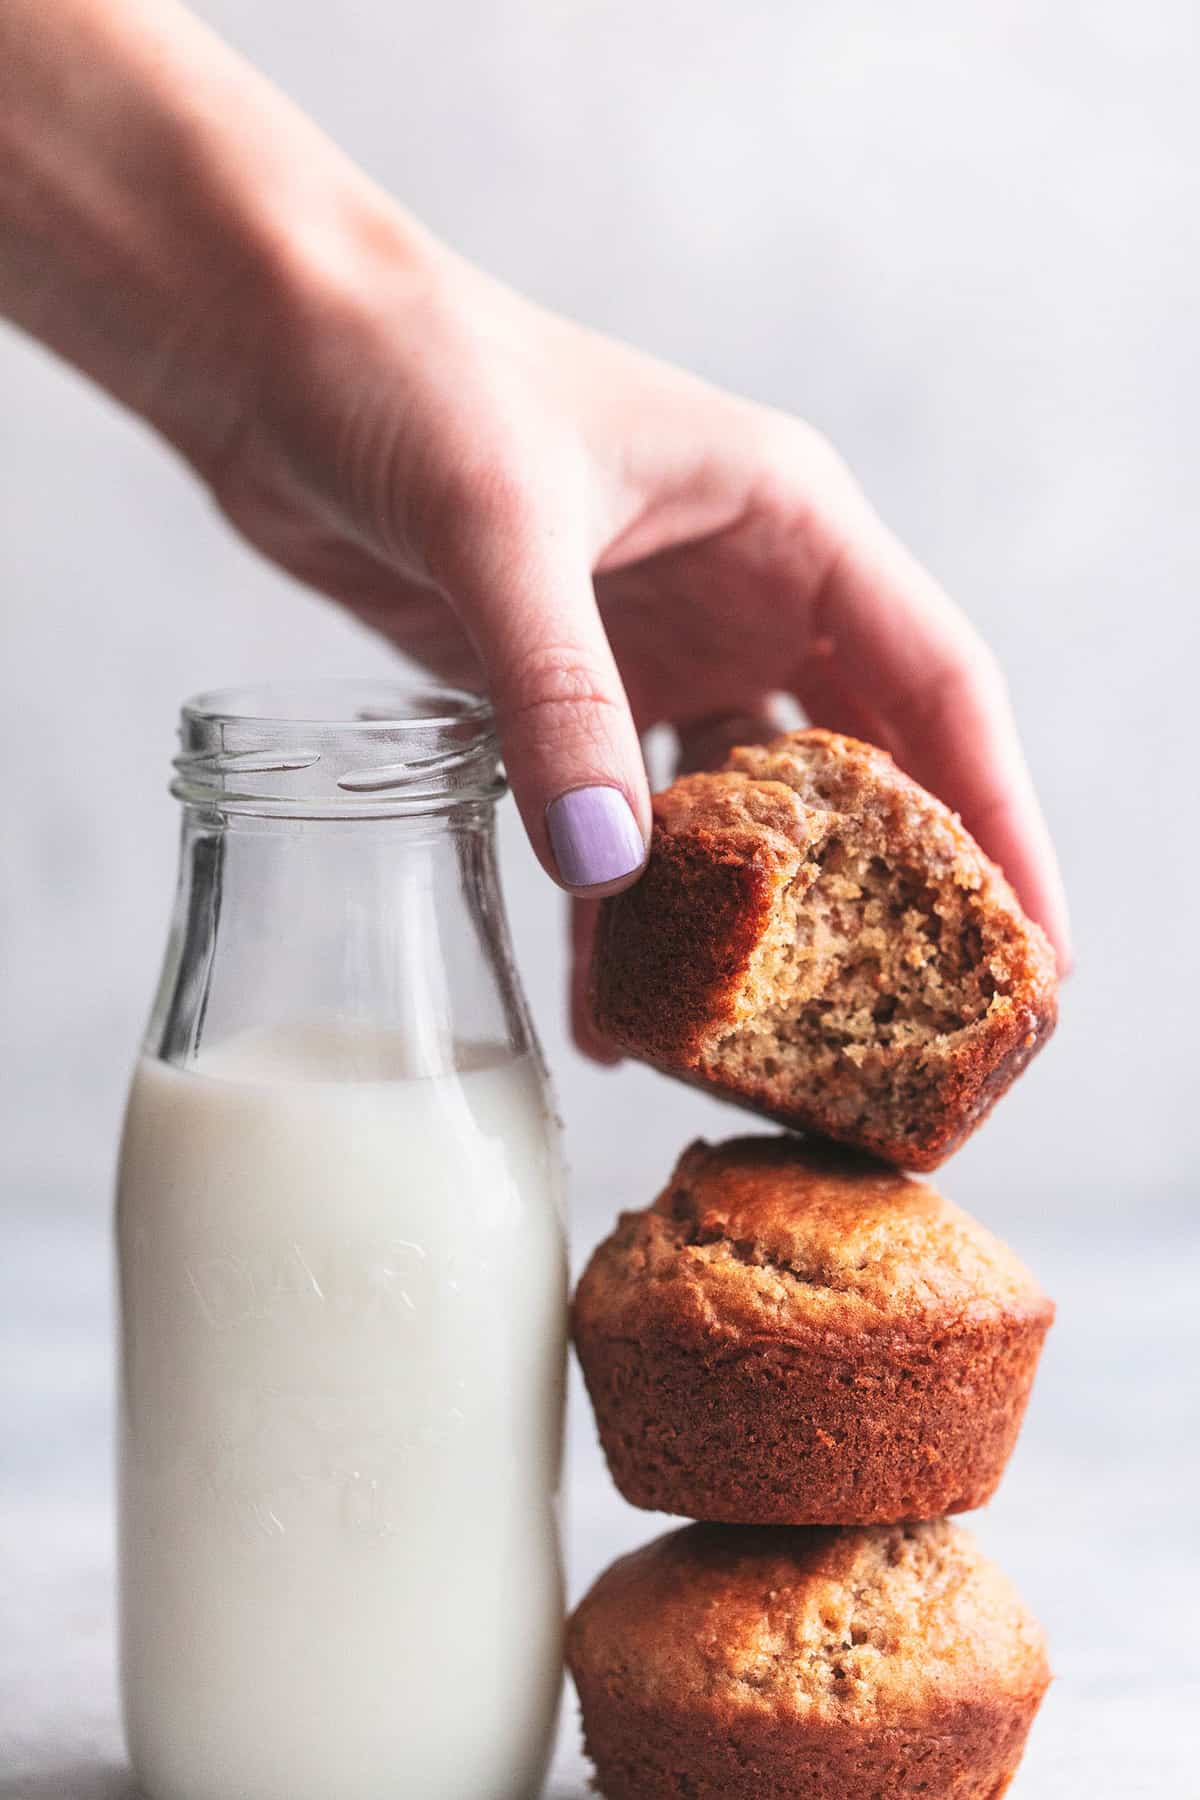 a hand picking up a bran muffin with a bite out stacked on top of more muffins with a bottle of milk on the side.